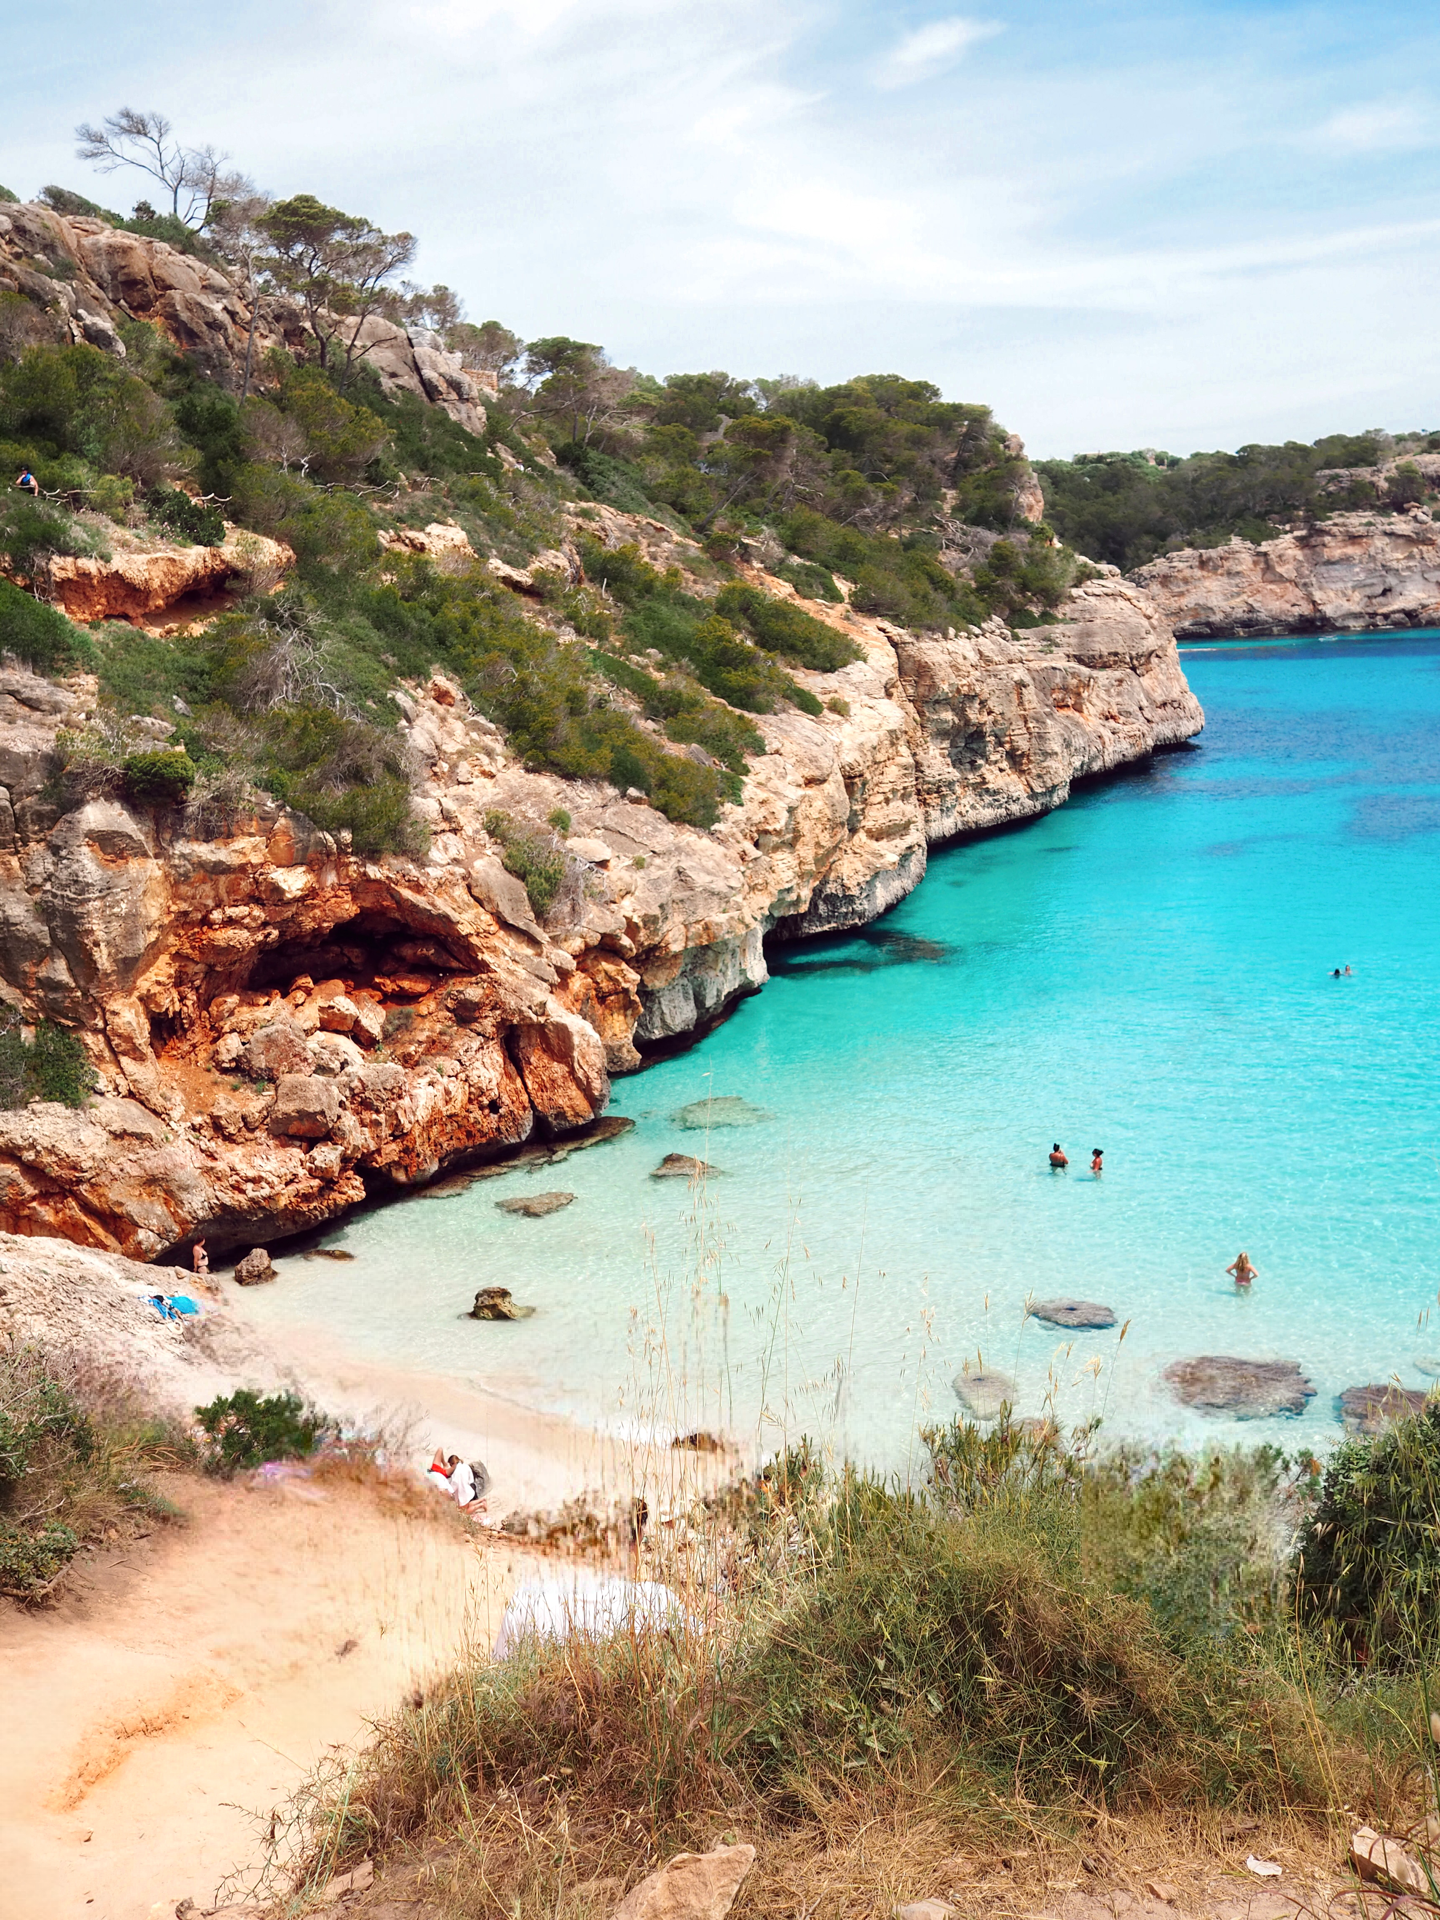 Cala des Moro beach in the South East of the Balearic island of Mallorca.